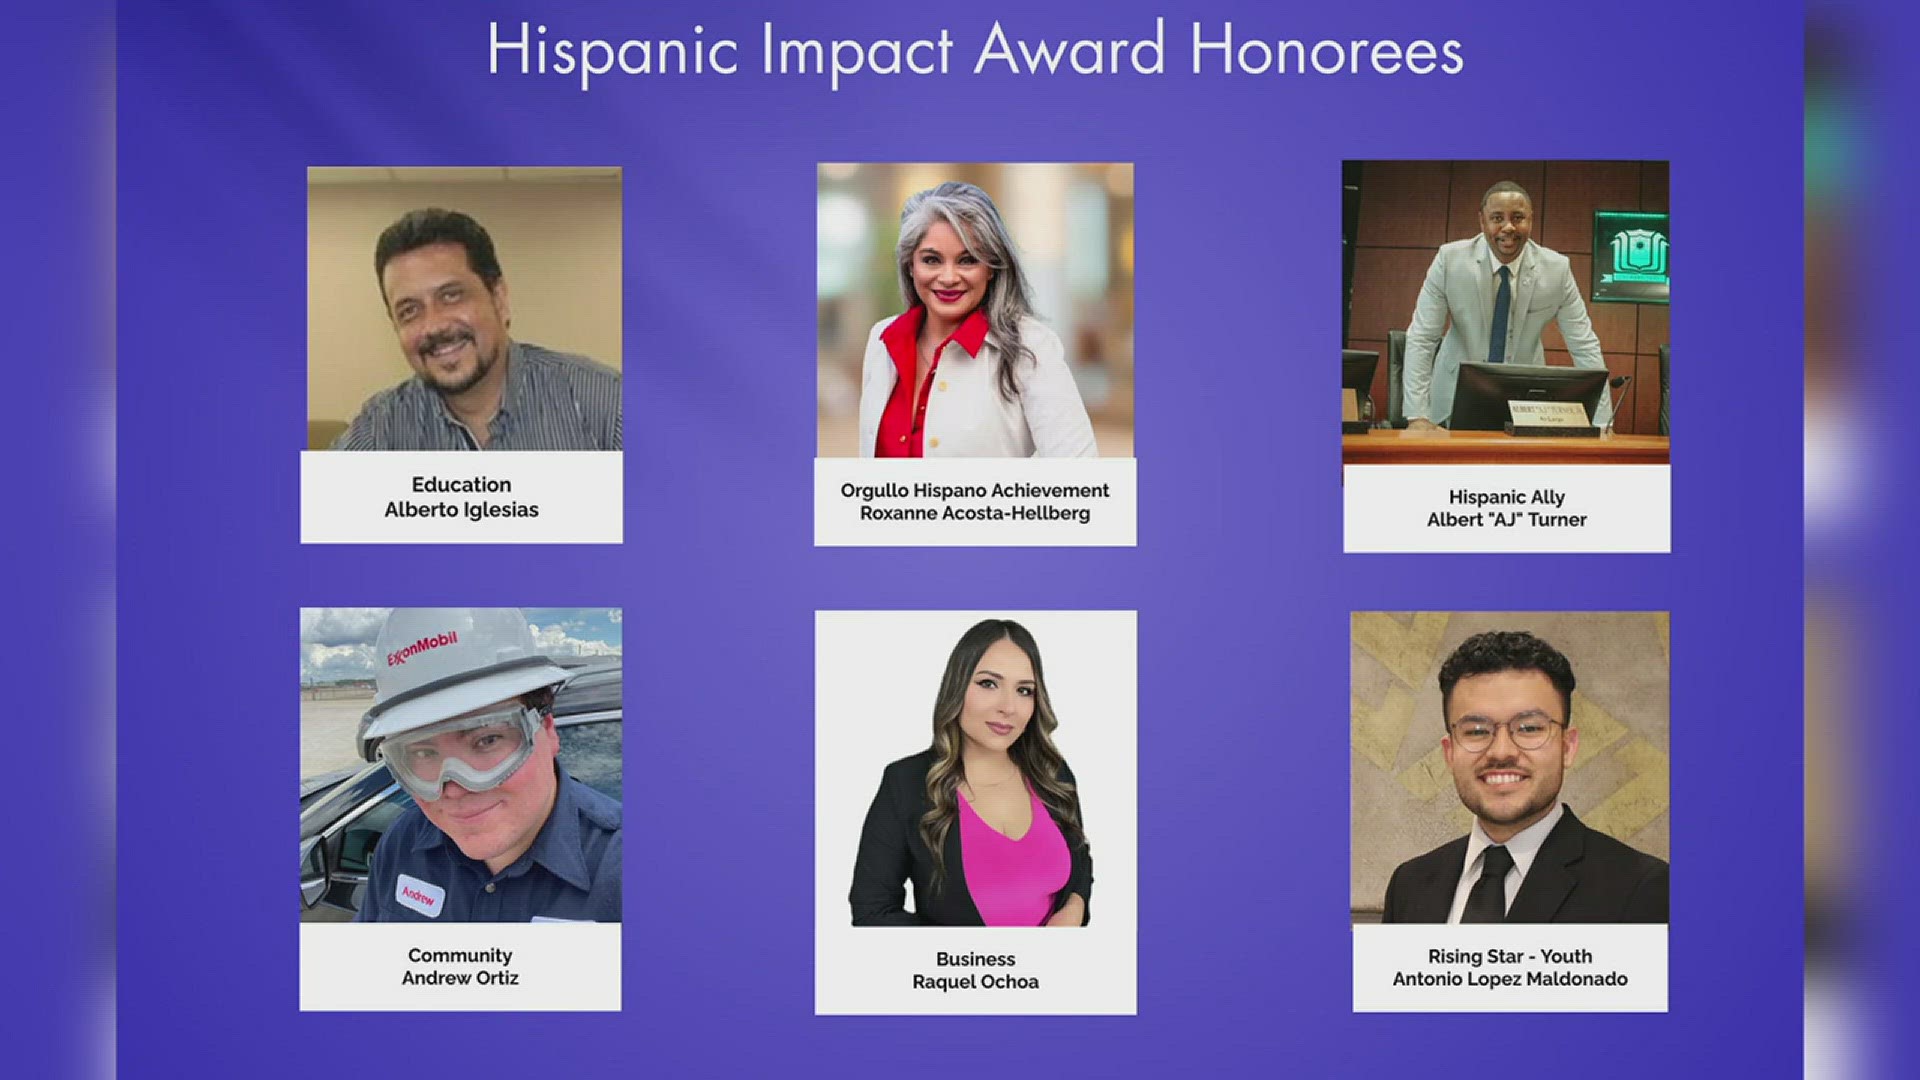 The six honorees come from all walks of life. Some of them are immigrants and others are first generation college graduates.